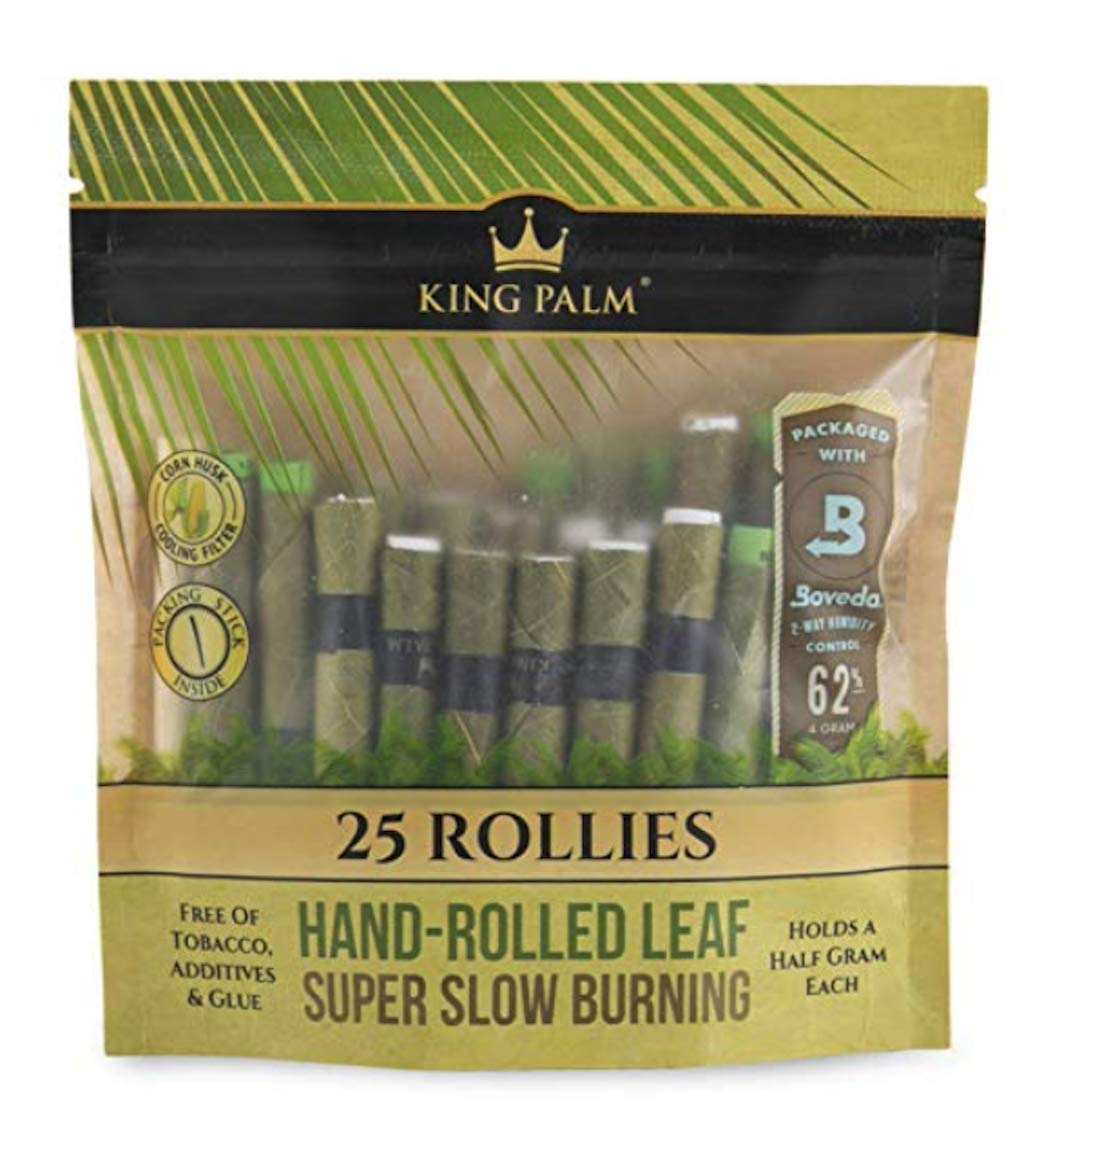 King Palm Rollie 25 pack